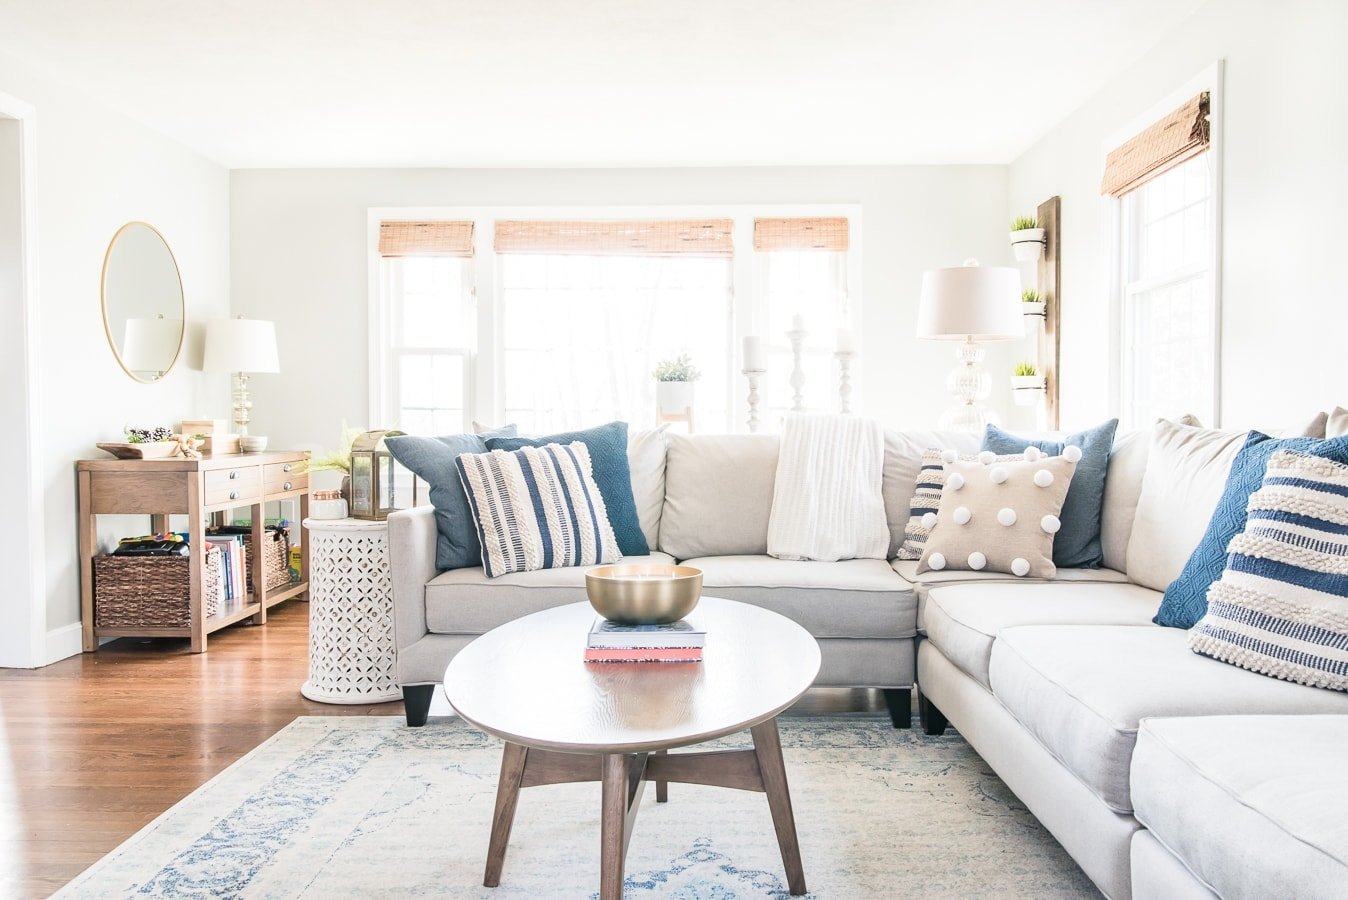 How to Decorate Your Living Room on a Budget